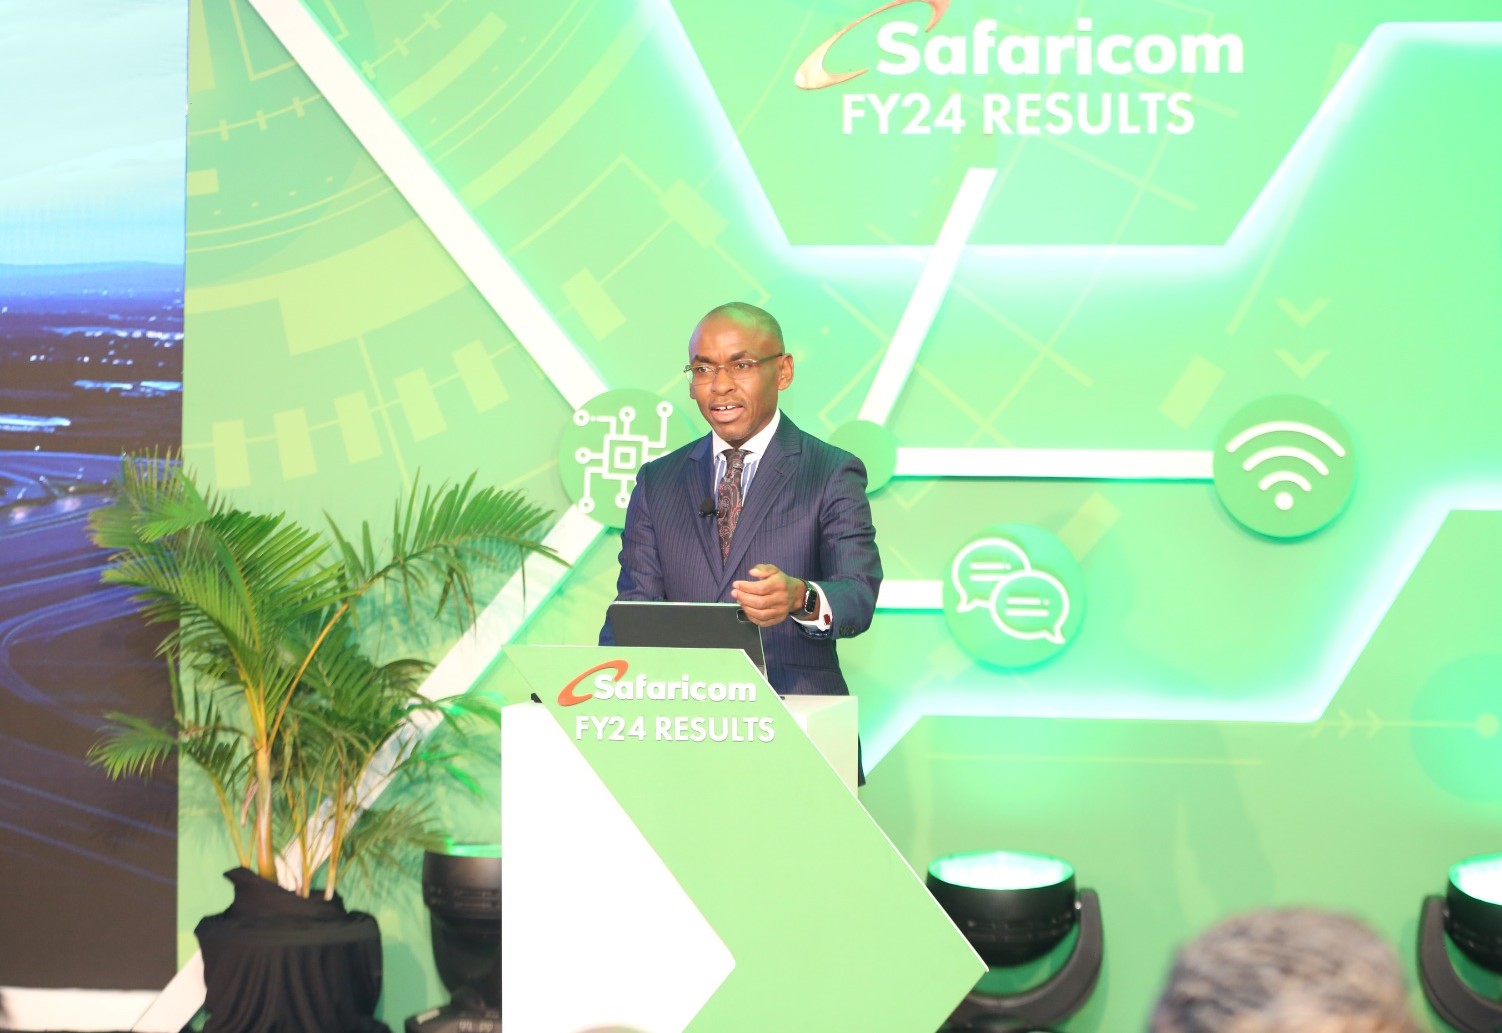 Safaricom announces restoration of full network capacity stability after undersea cable cuts